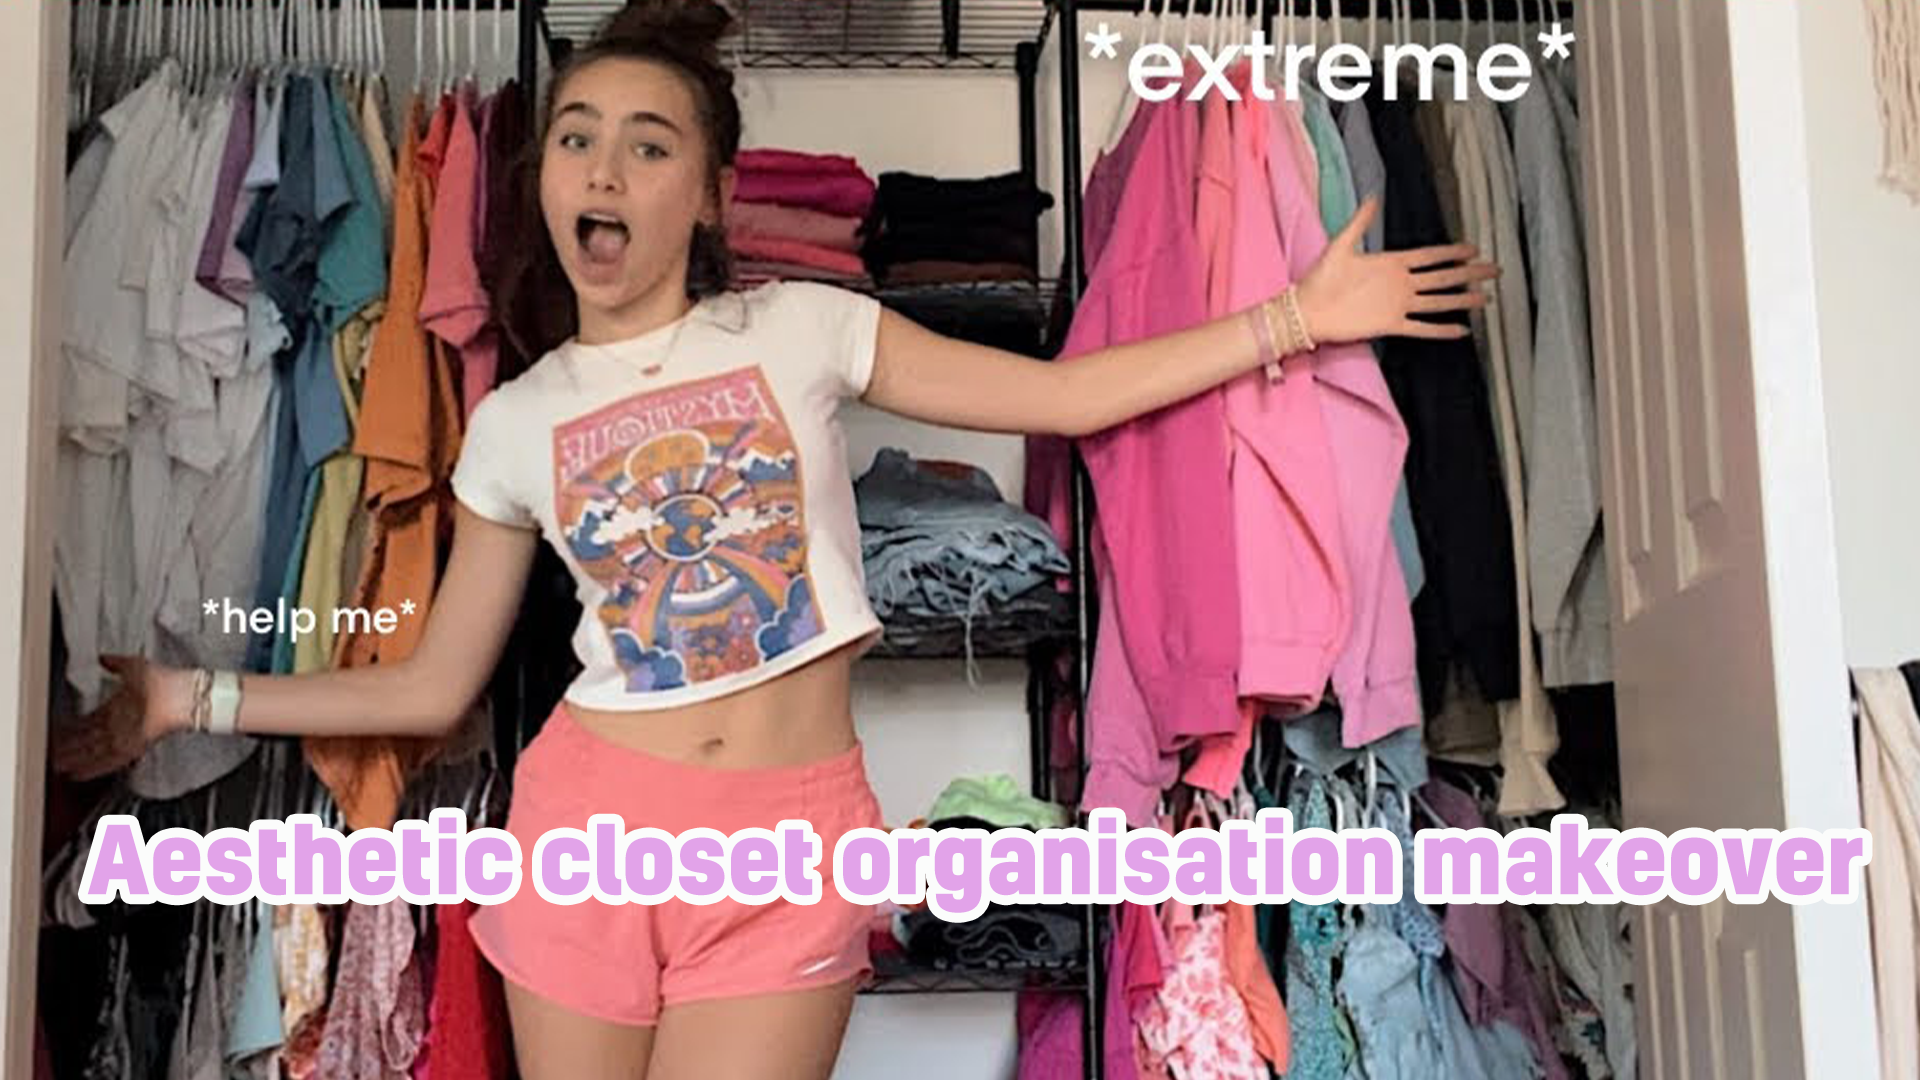 You're a classic type A with a need to organise, and this video is exactly what will satisfy you! Maybe it will even inspire you to empty out your own wardrobe?